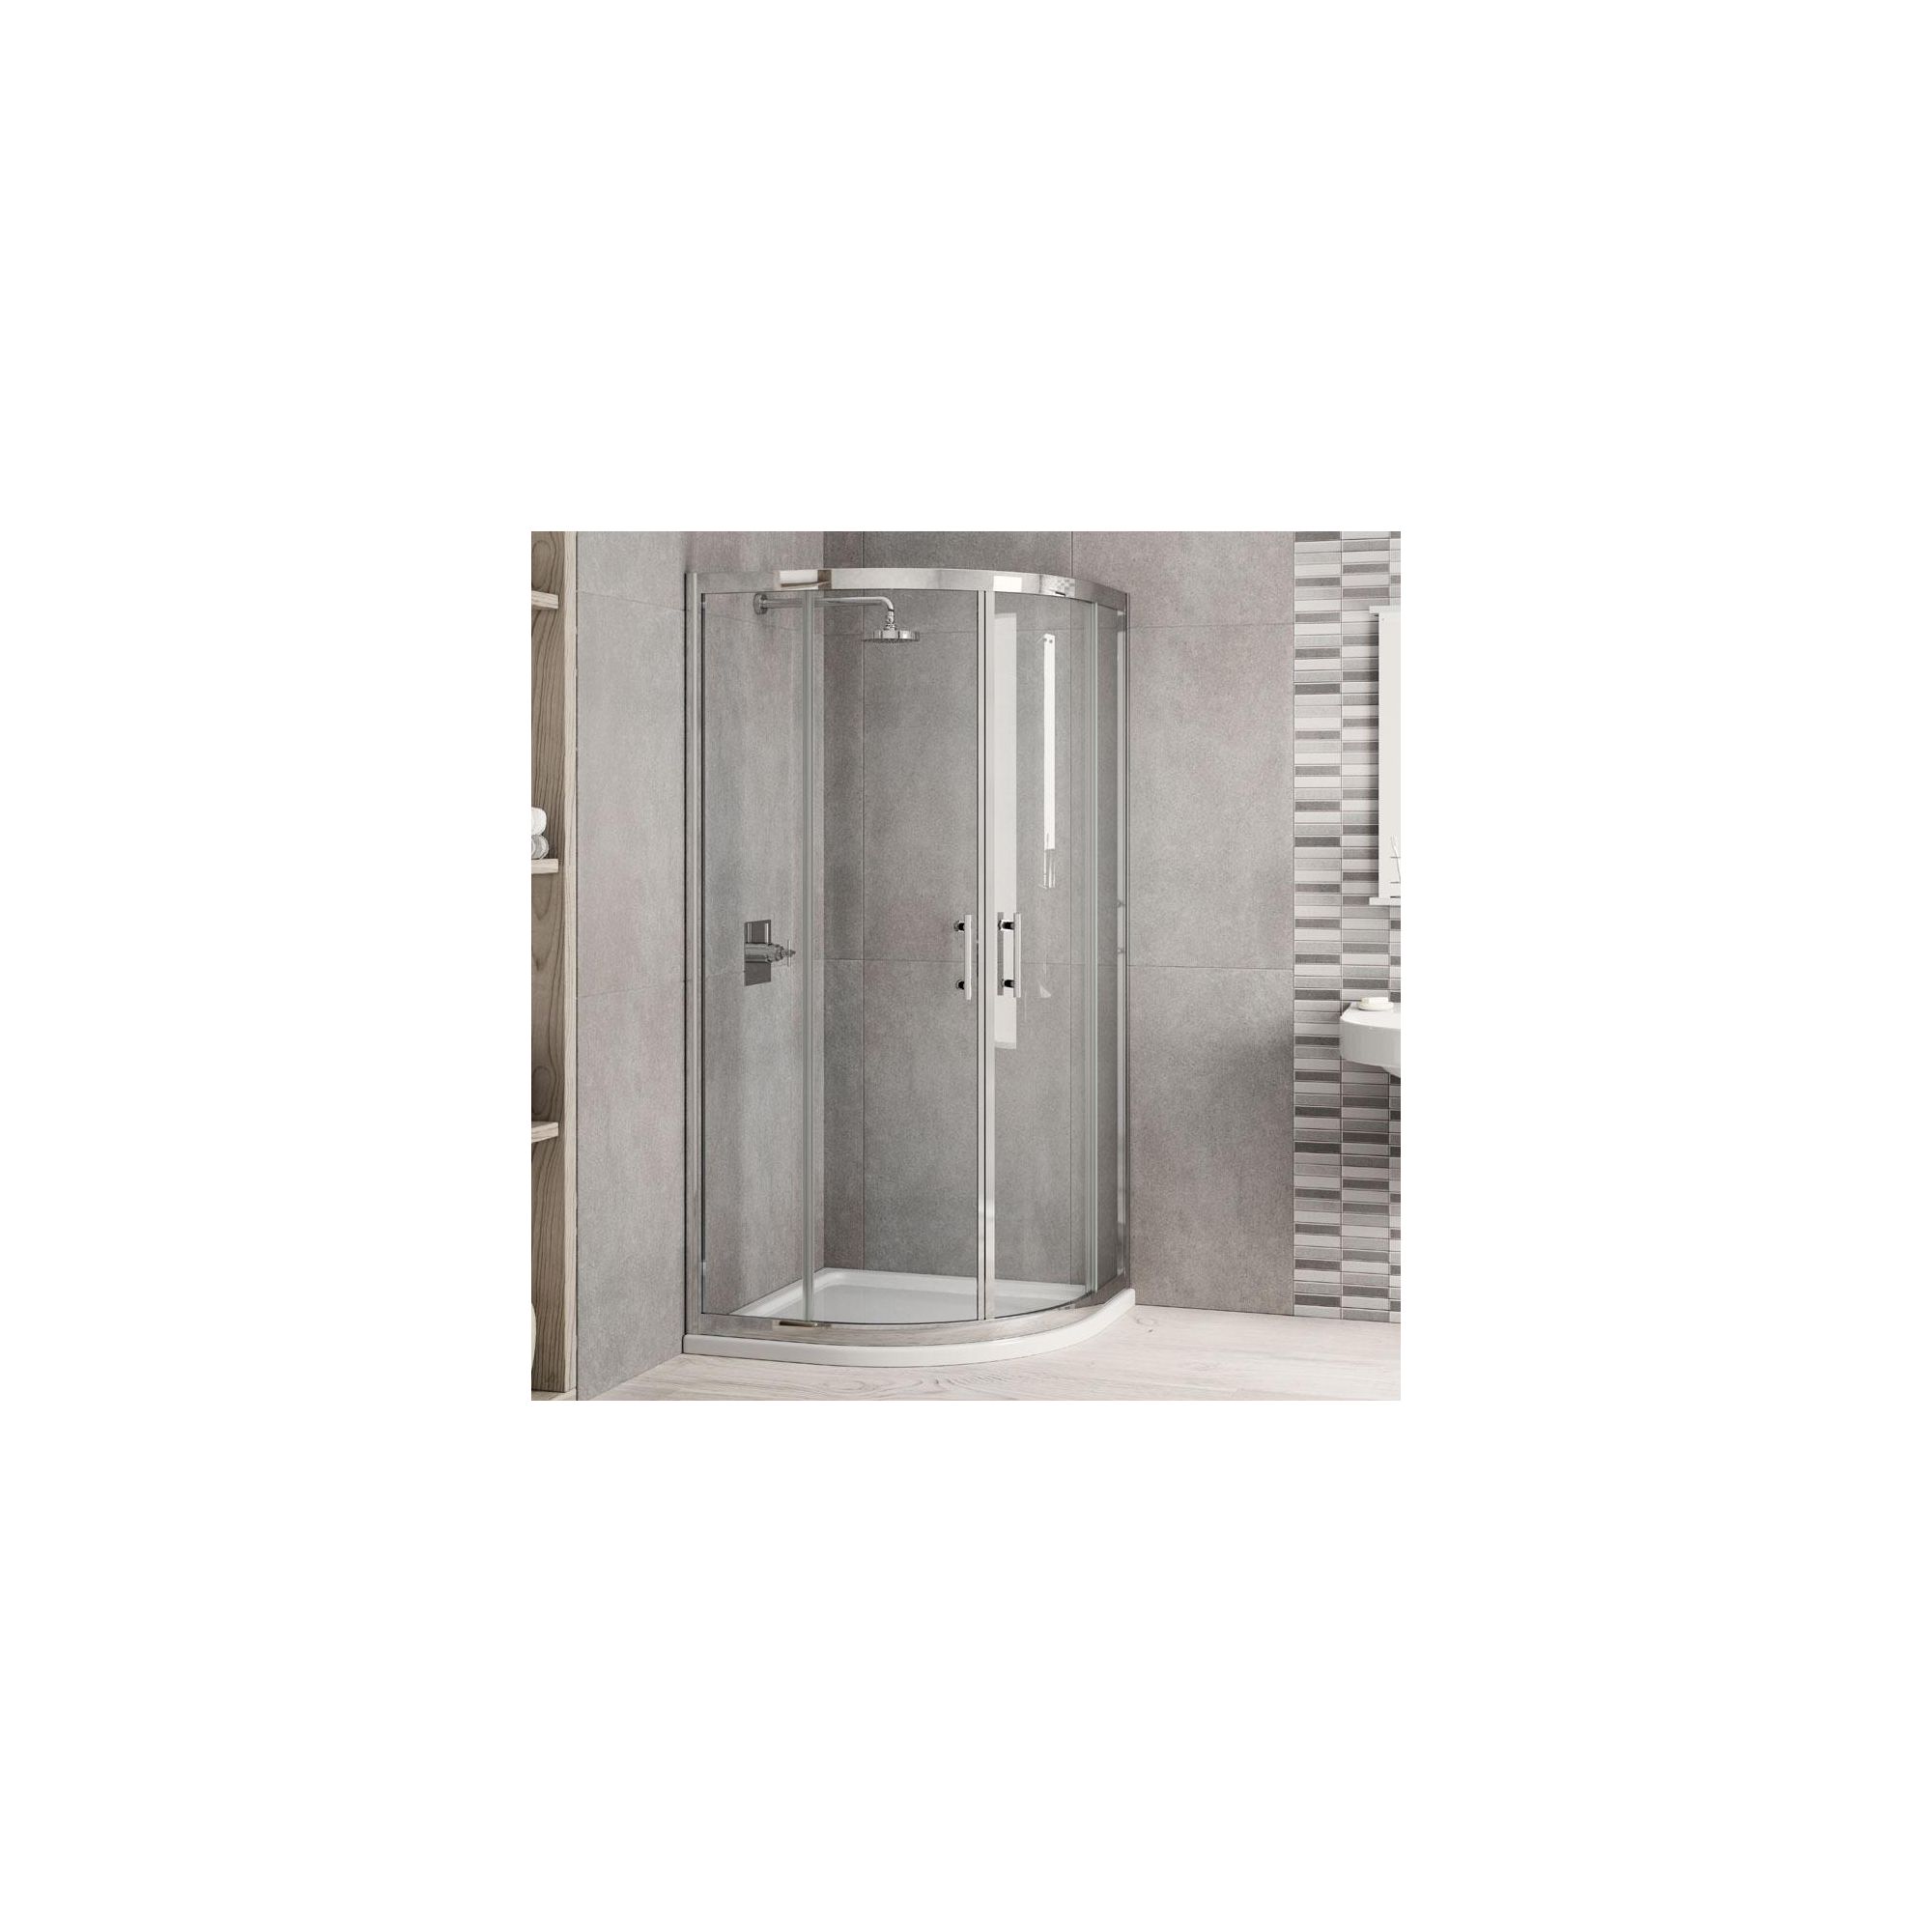 Elemis Inspire Two-Door Quadrant Shower Enclosure, 900mm x 900mm, 6mm Glass, Low Profile Tray at Tesco Direct